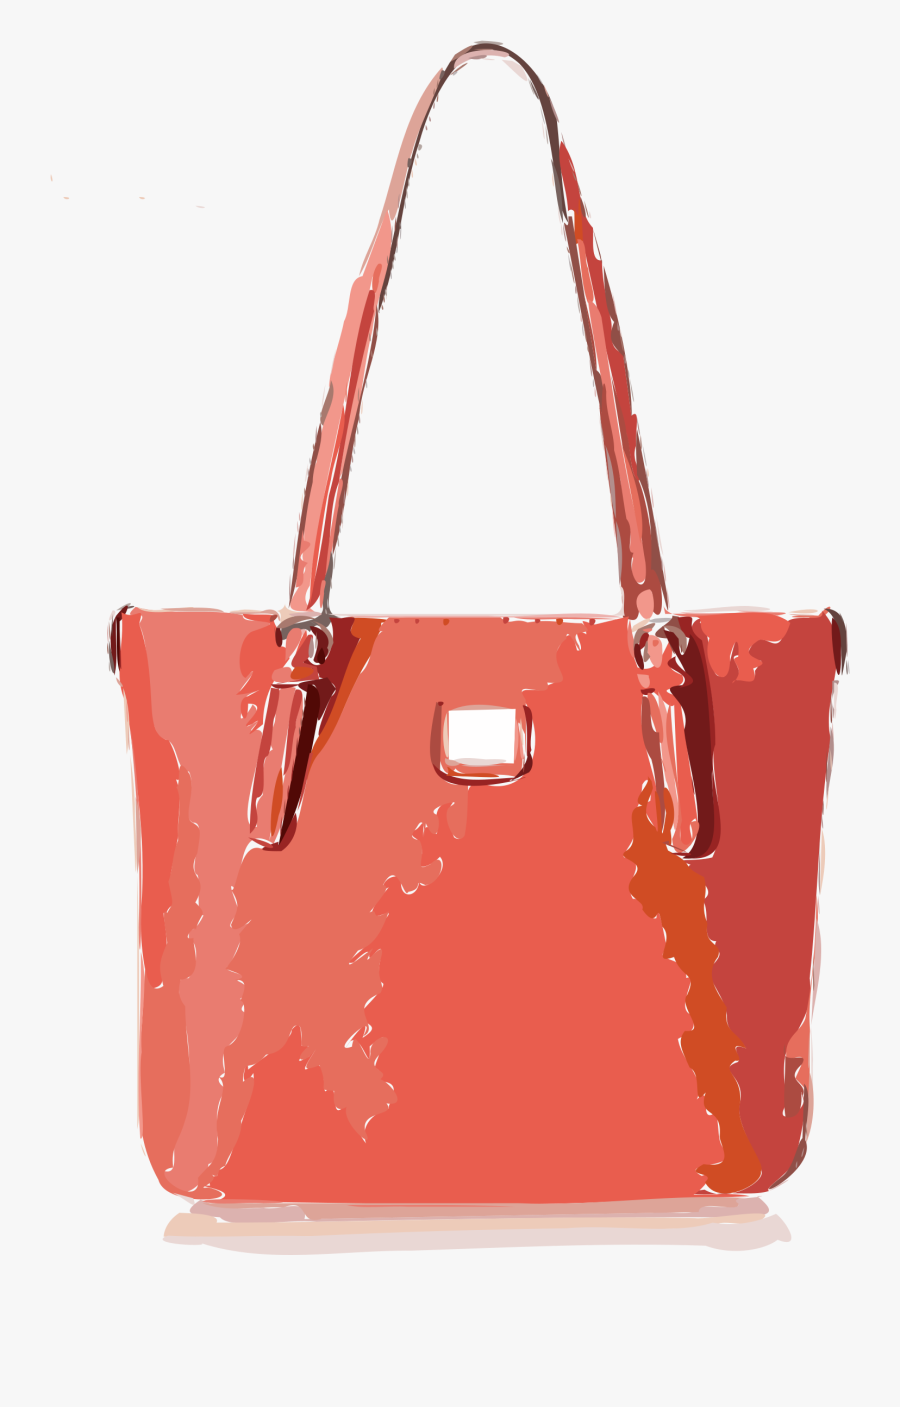 Red Purse Png - Tote Bag, Transparent Clipart